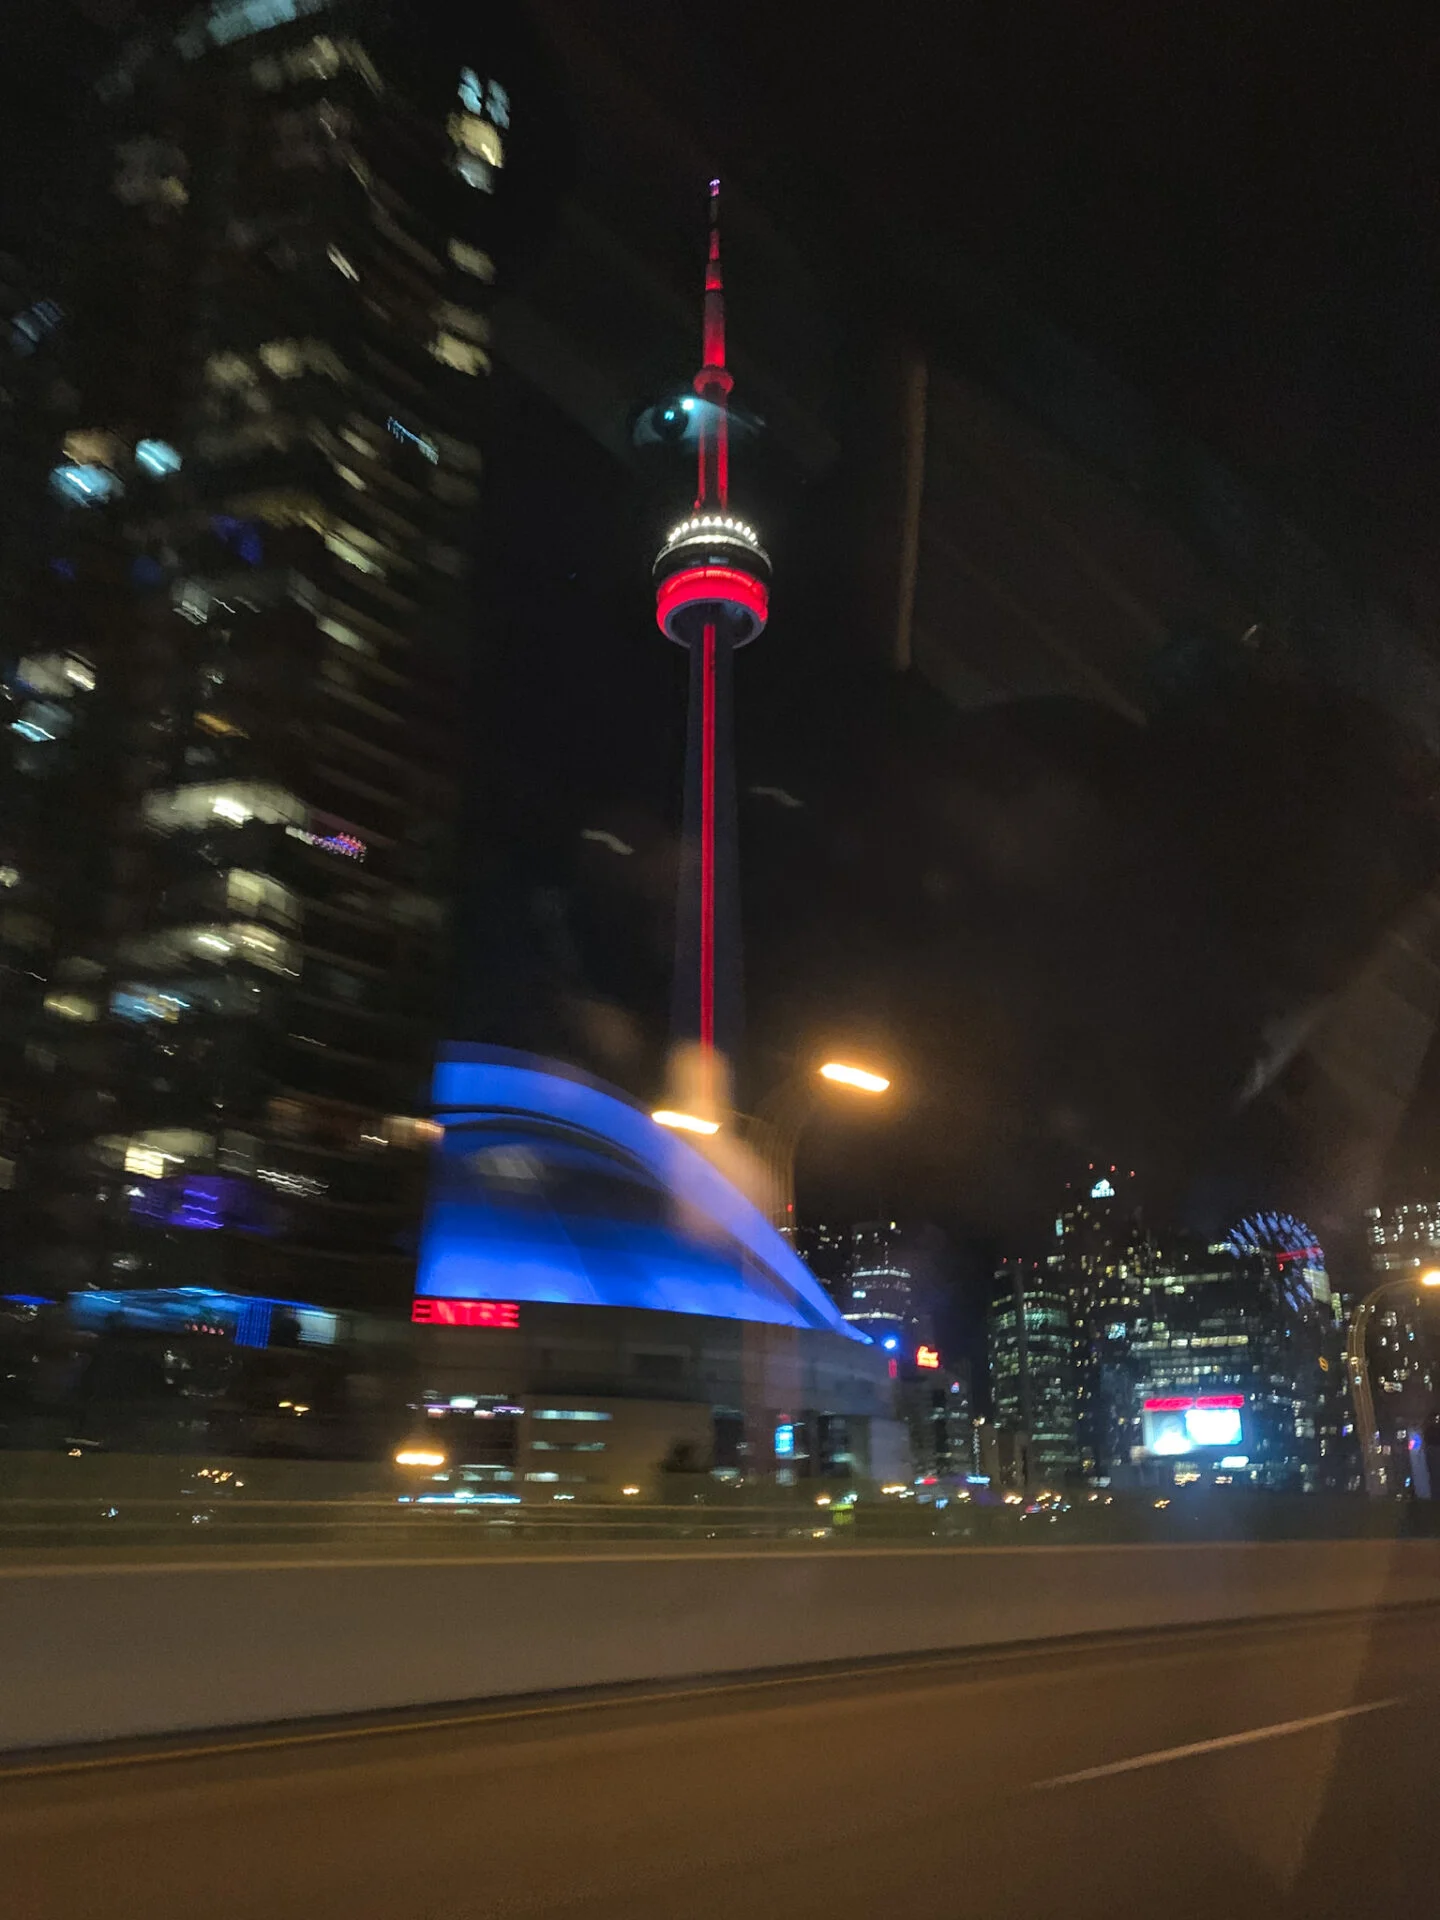 Driving by the CN Tower on the Gardiner Express highway in Toronto at night